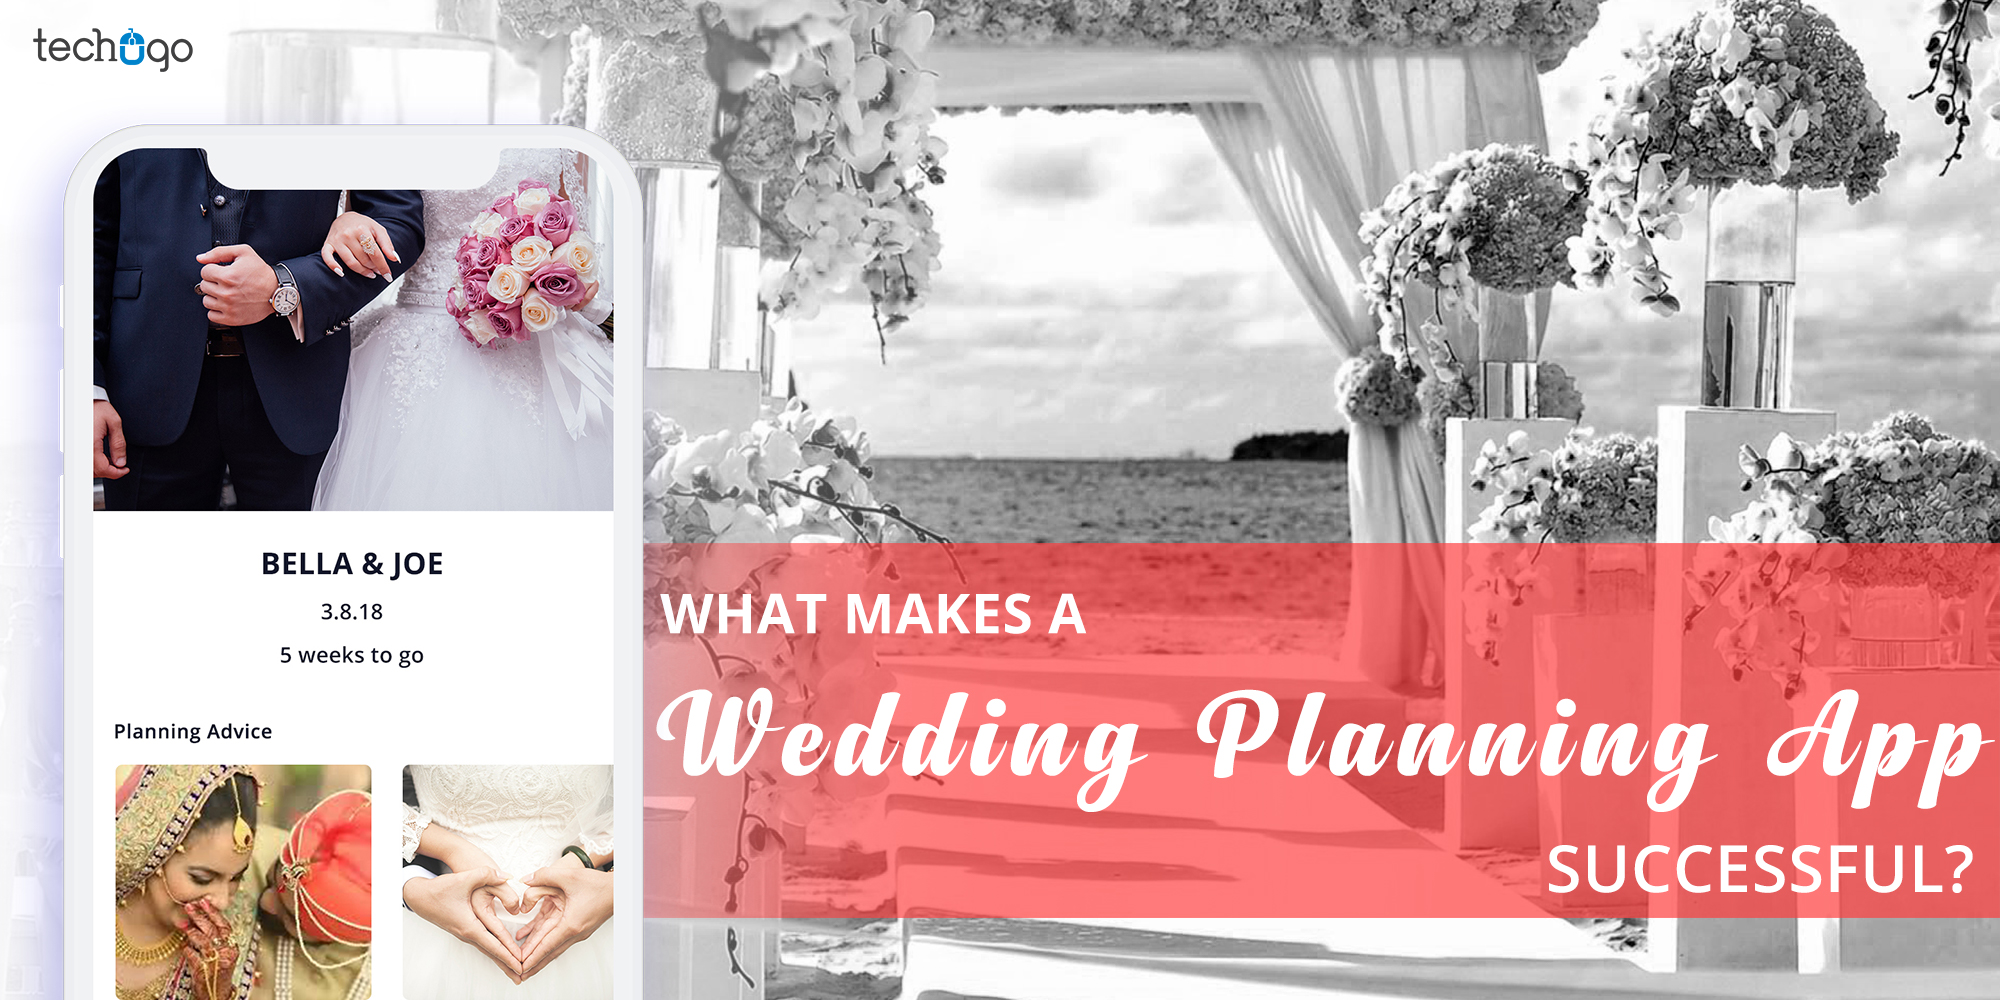 What Makes A Wedding Planning App Successful?